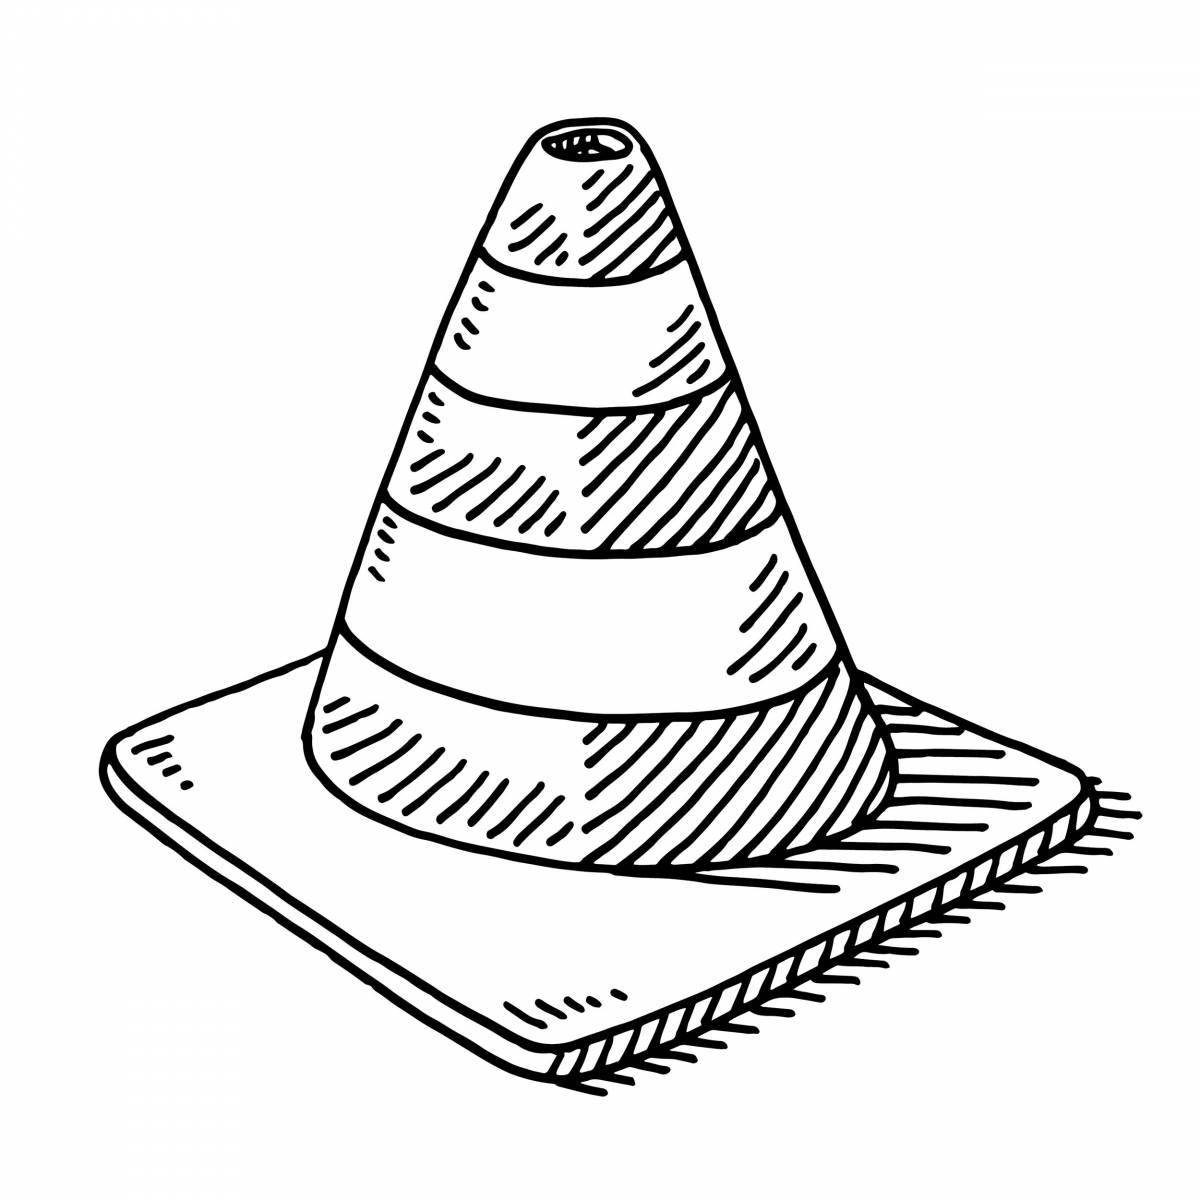 Luminous cone coloring page